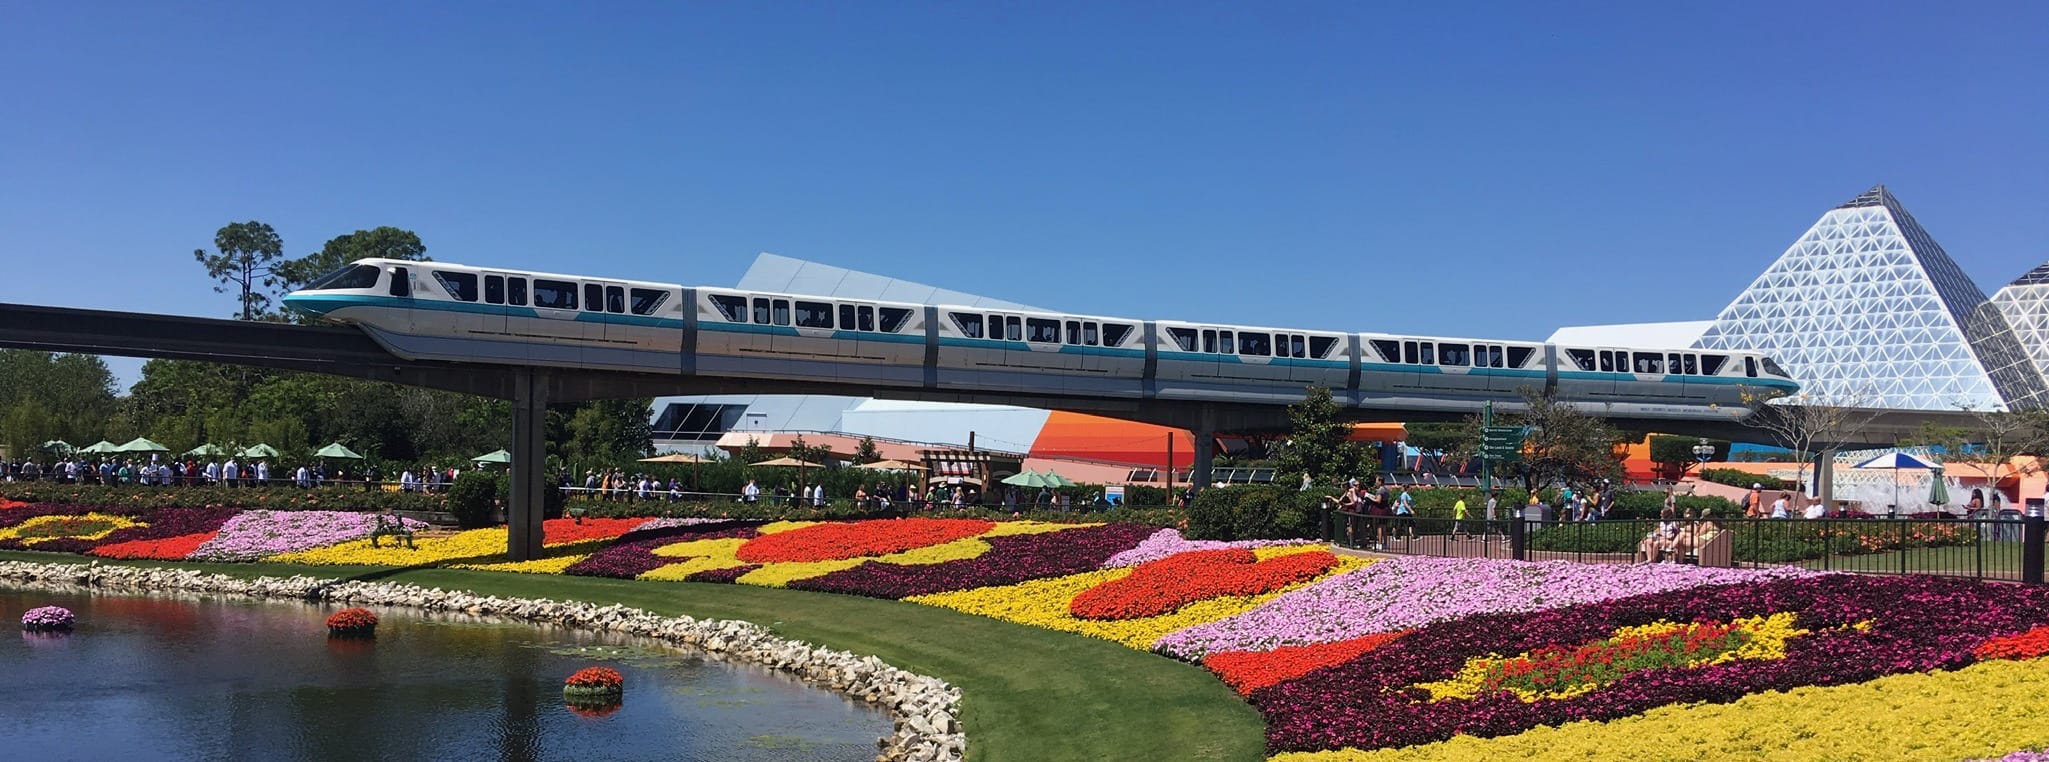 Monorail over flowers at Epcot's International Flower and Garden Festival